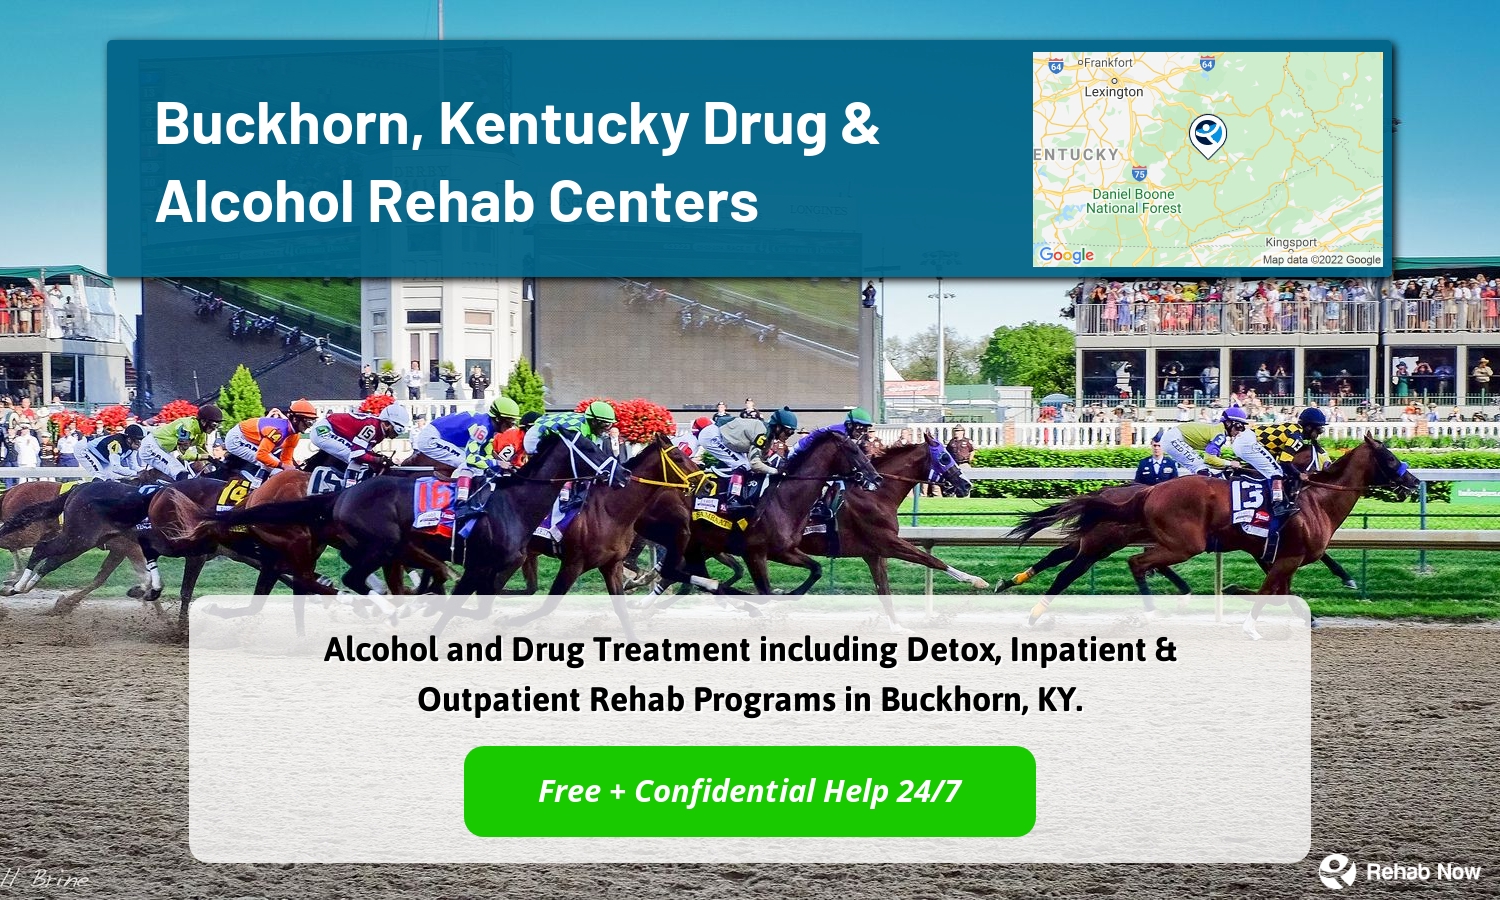 Alcohol and Drug Treatment including Detox, Inpatient & Outpatient Rehab Programs in Buckhorn, KY.